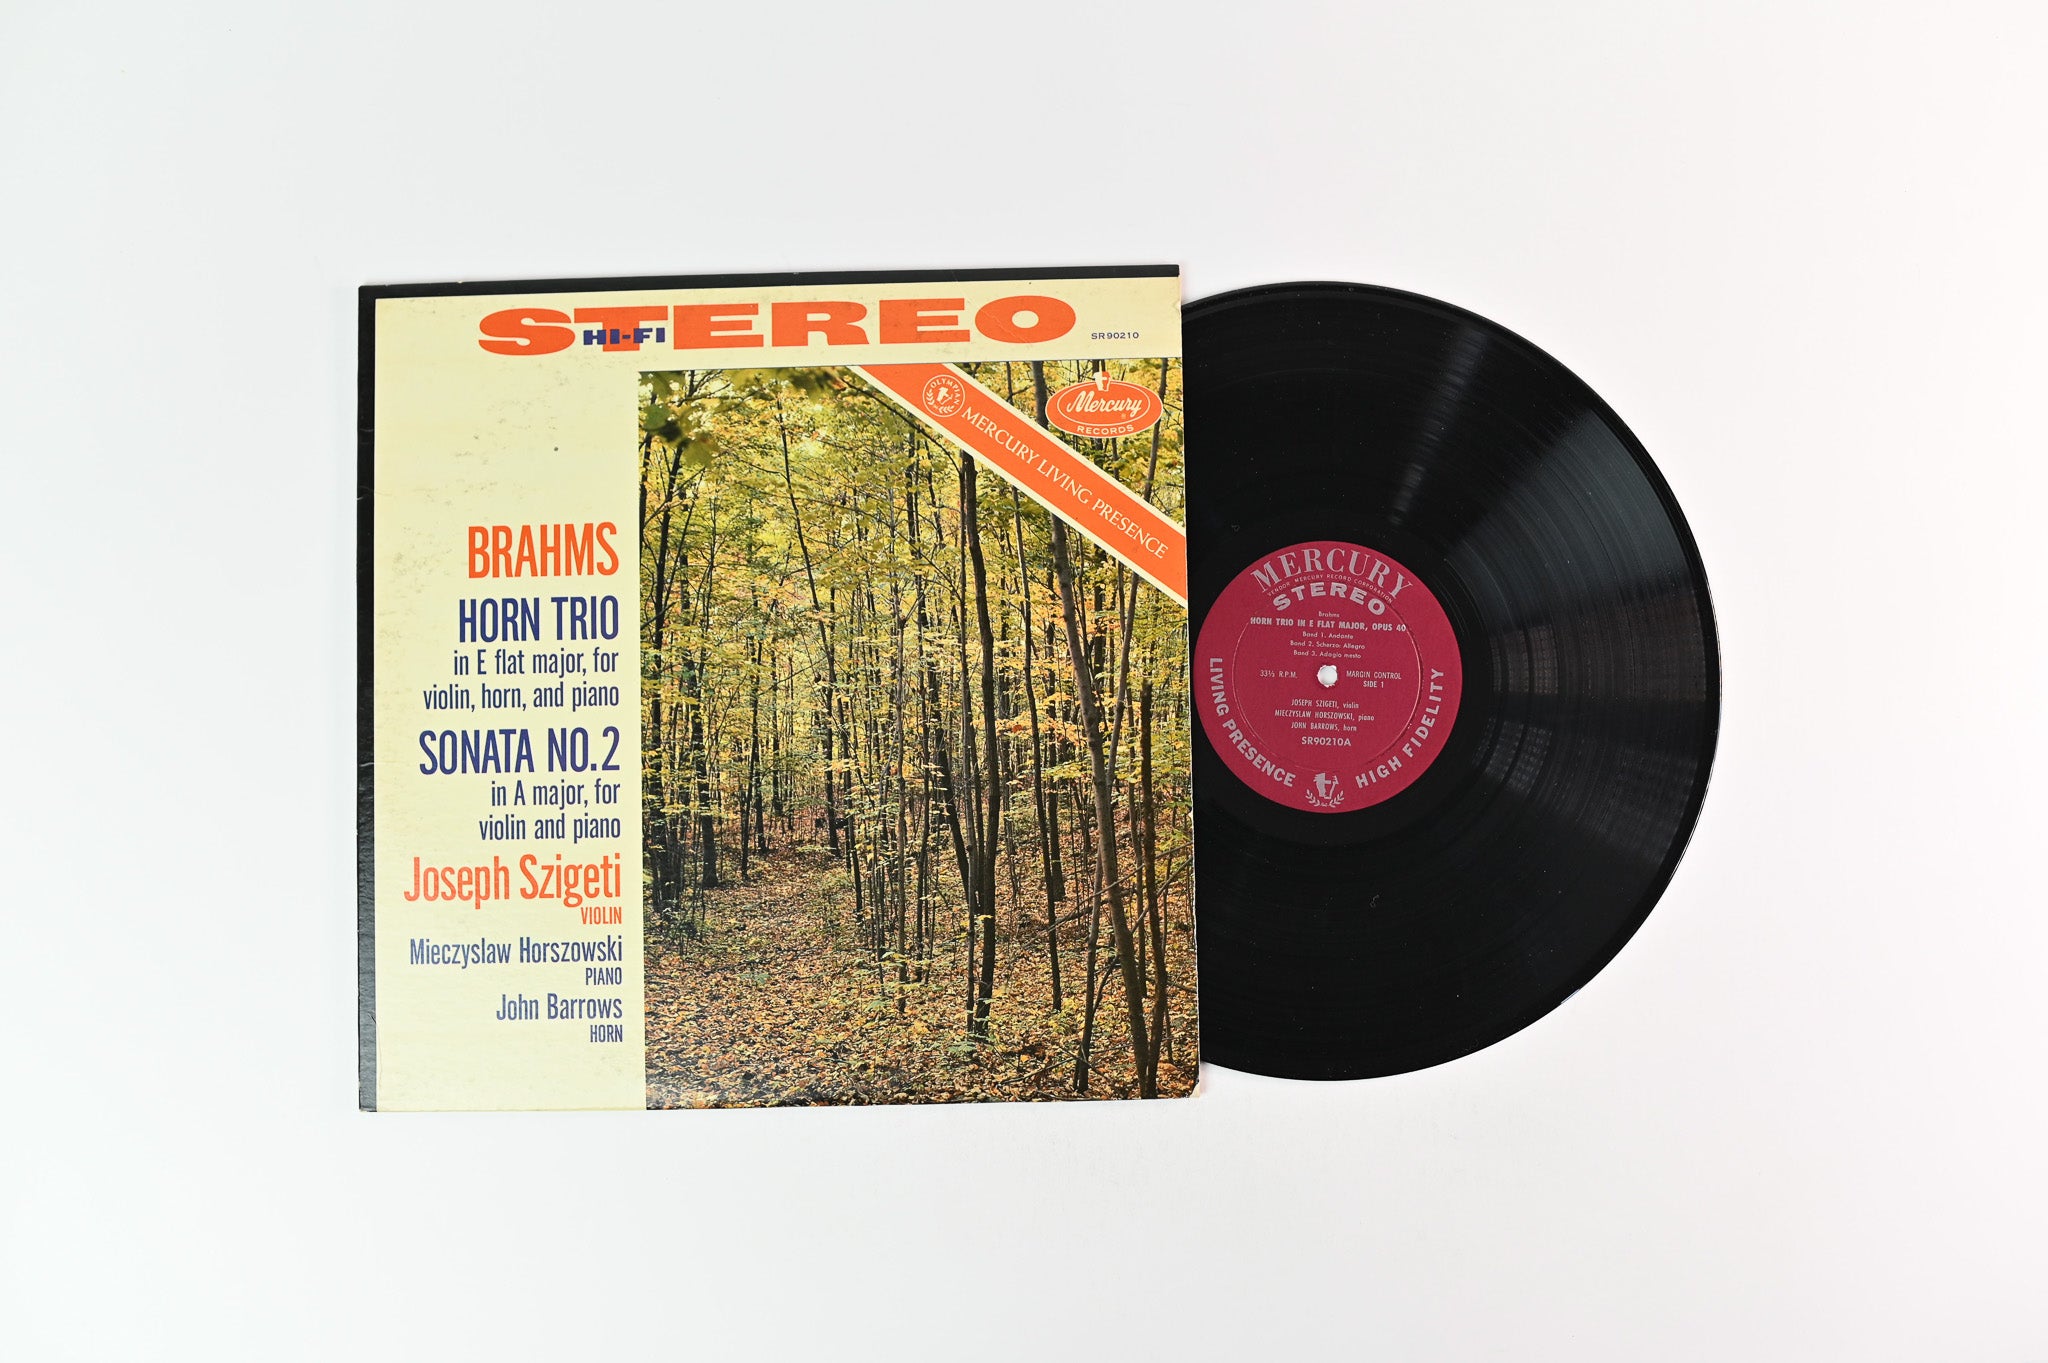 Joseph Szigeti - Brahms Horn Trio In E Flat Major, For Violin, Horn And Piano on Mercury SR90210 Stereo